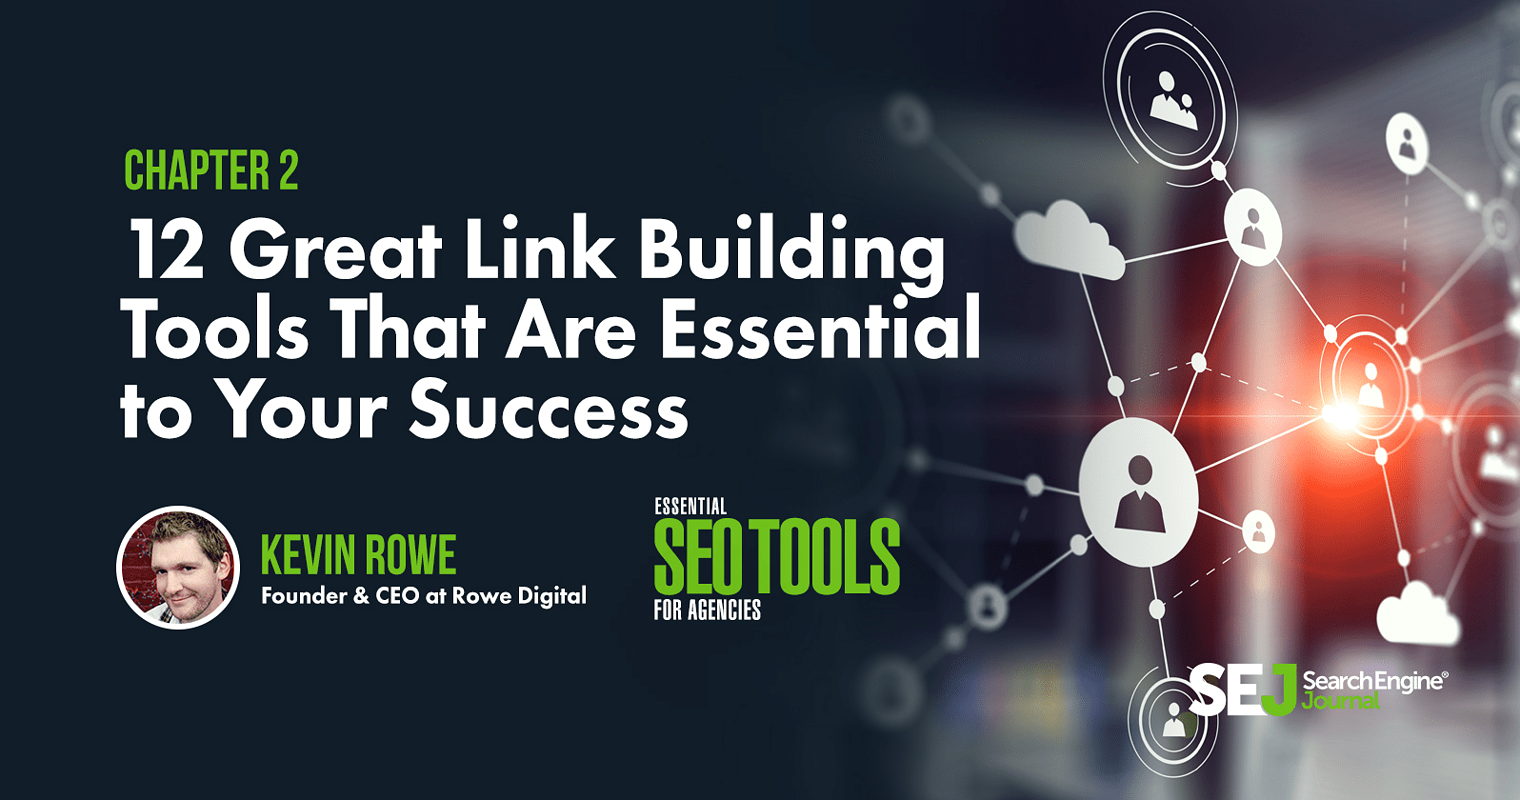 12 Great Link Building Tools That Are Essential to Your Success